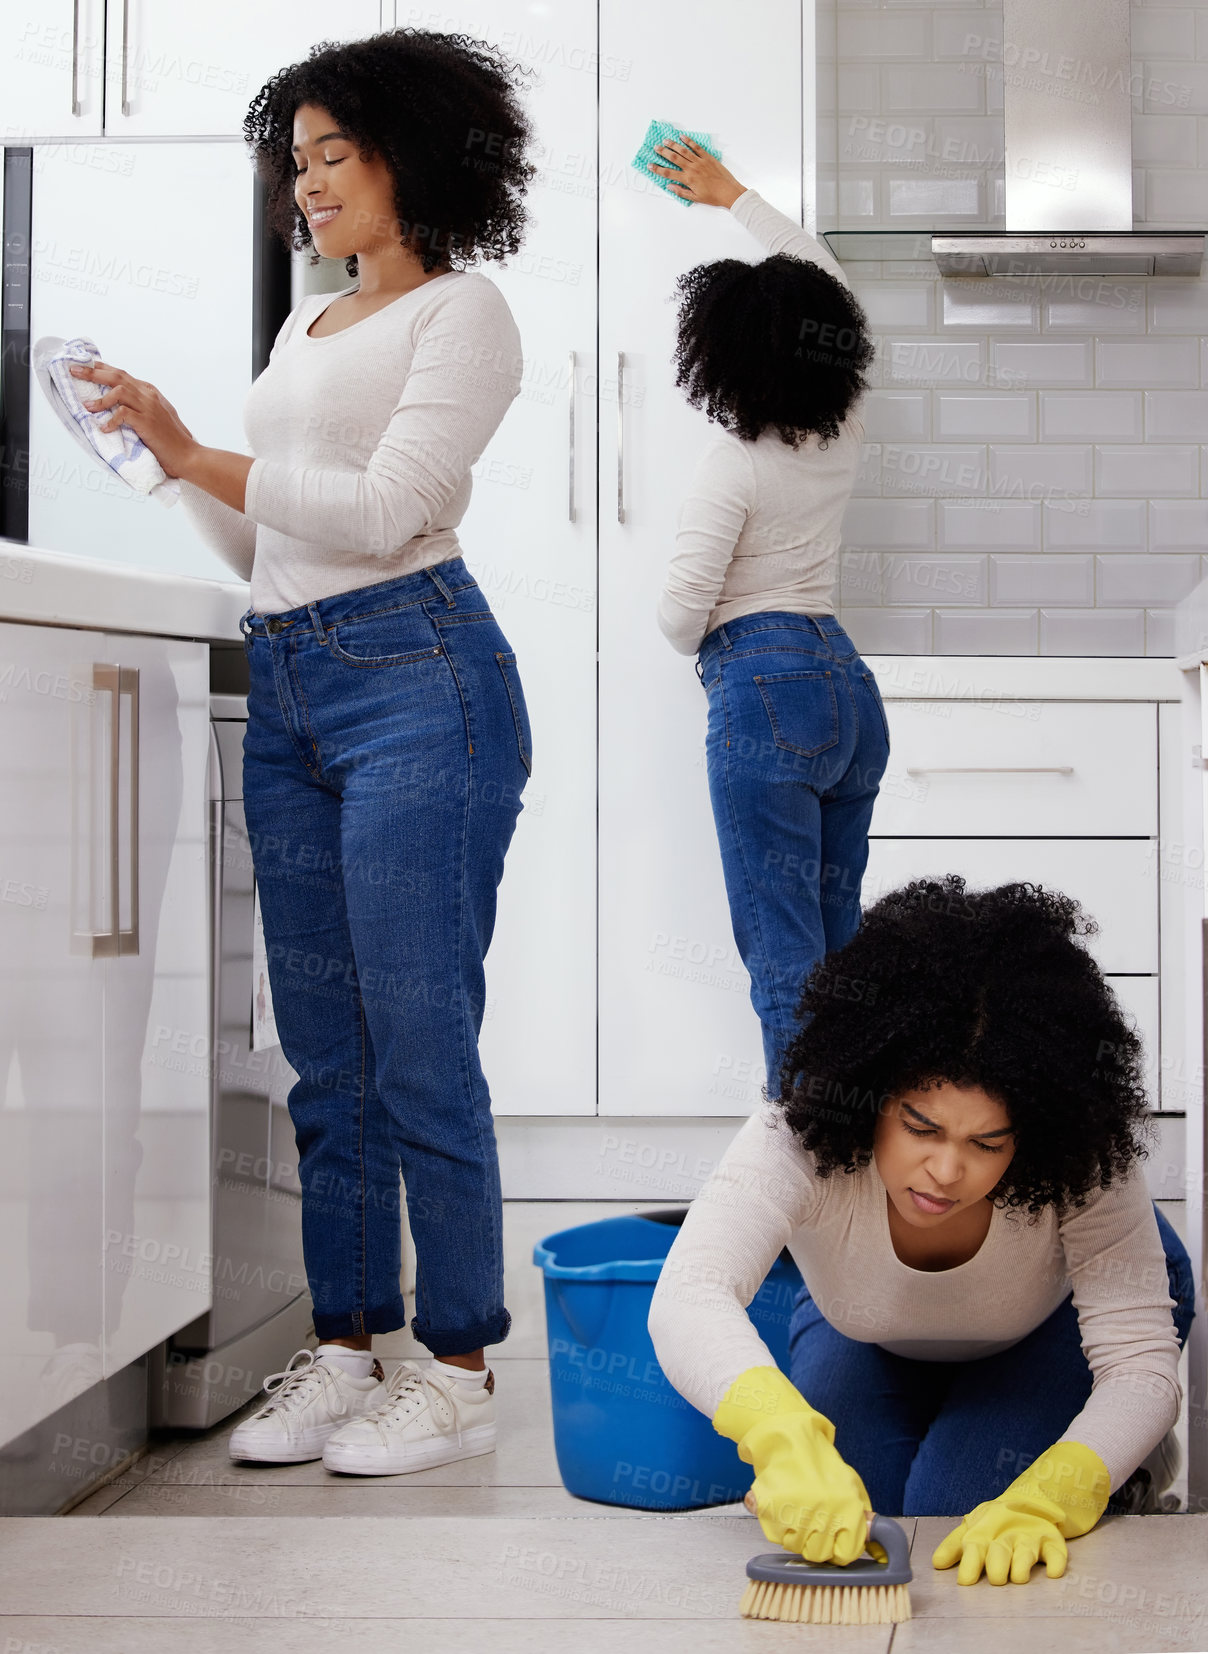 Buy stock photo Shot of a young woman cleaning the house